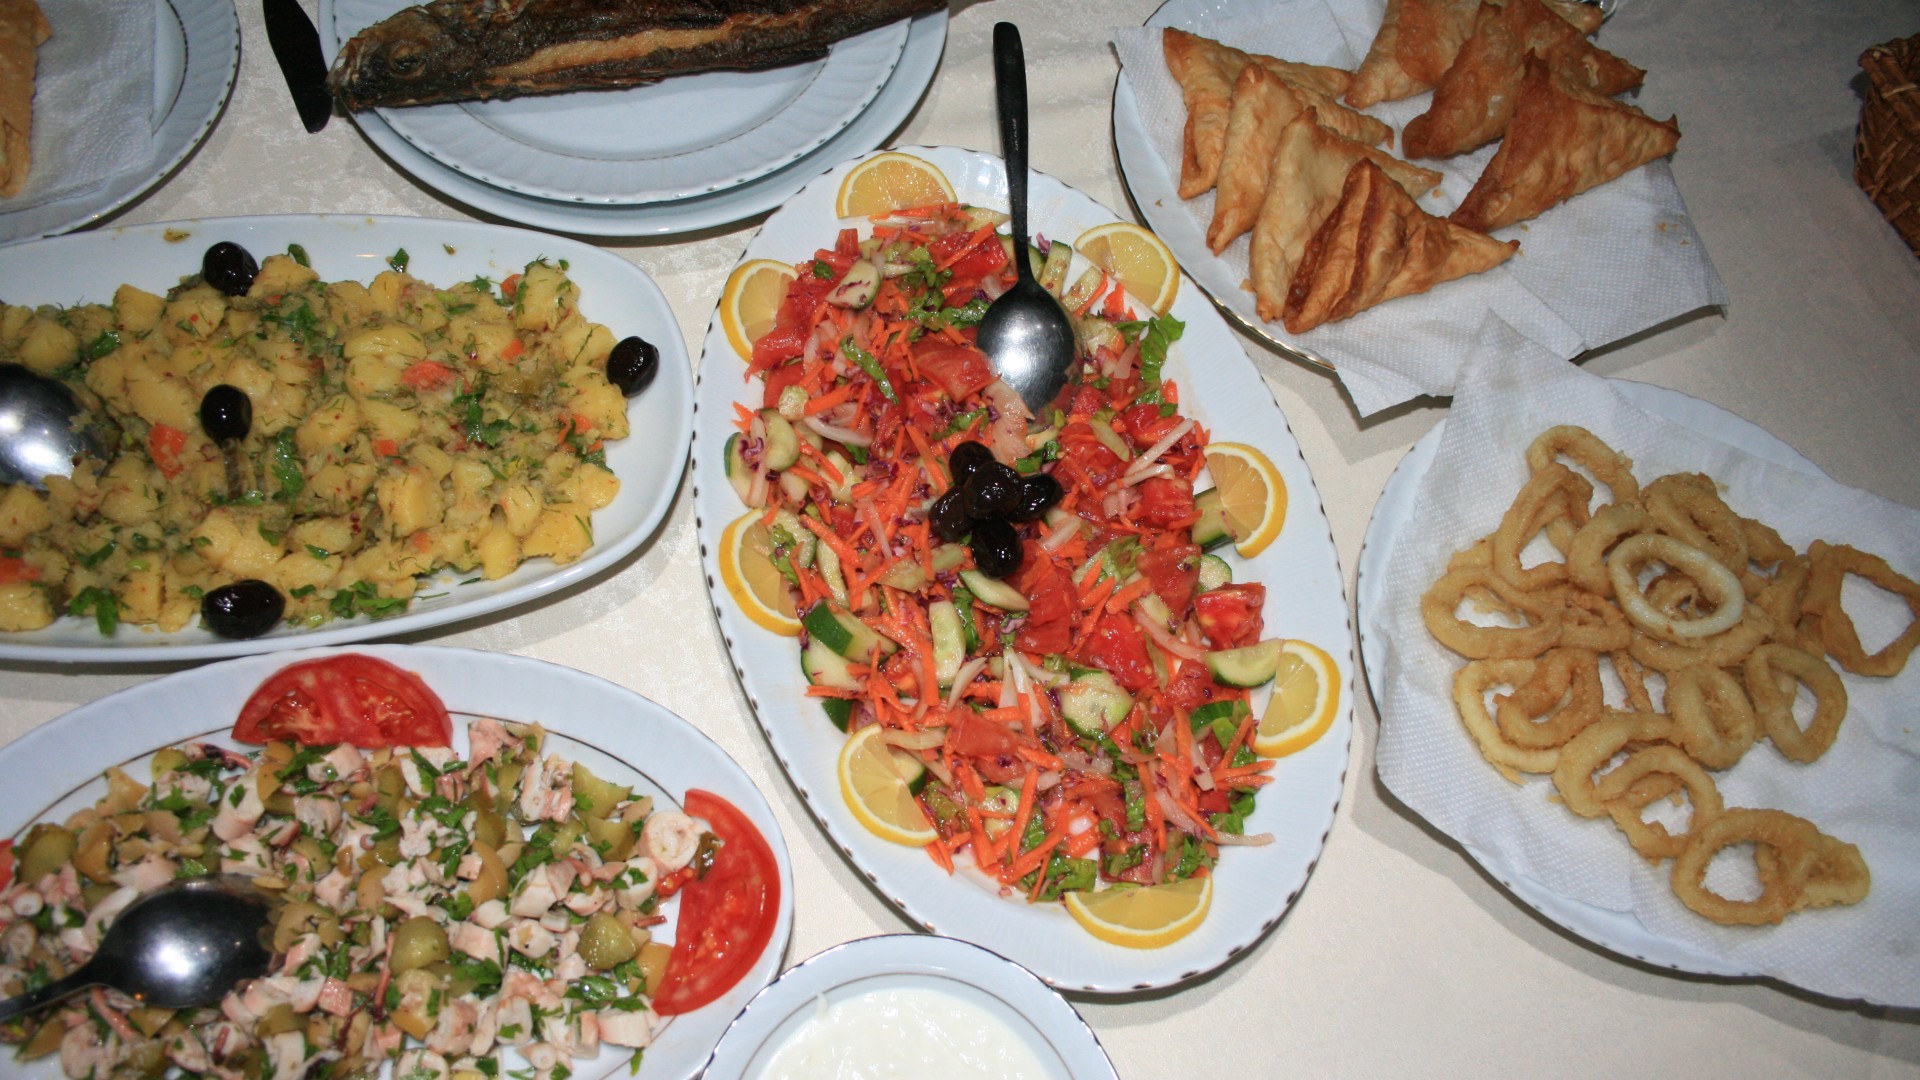 Plates of traditional Turkish food ready to be served to guests aboard a cruise